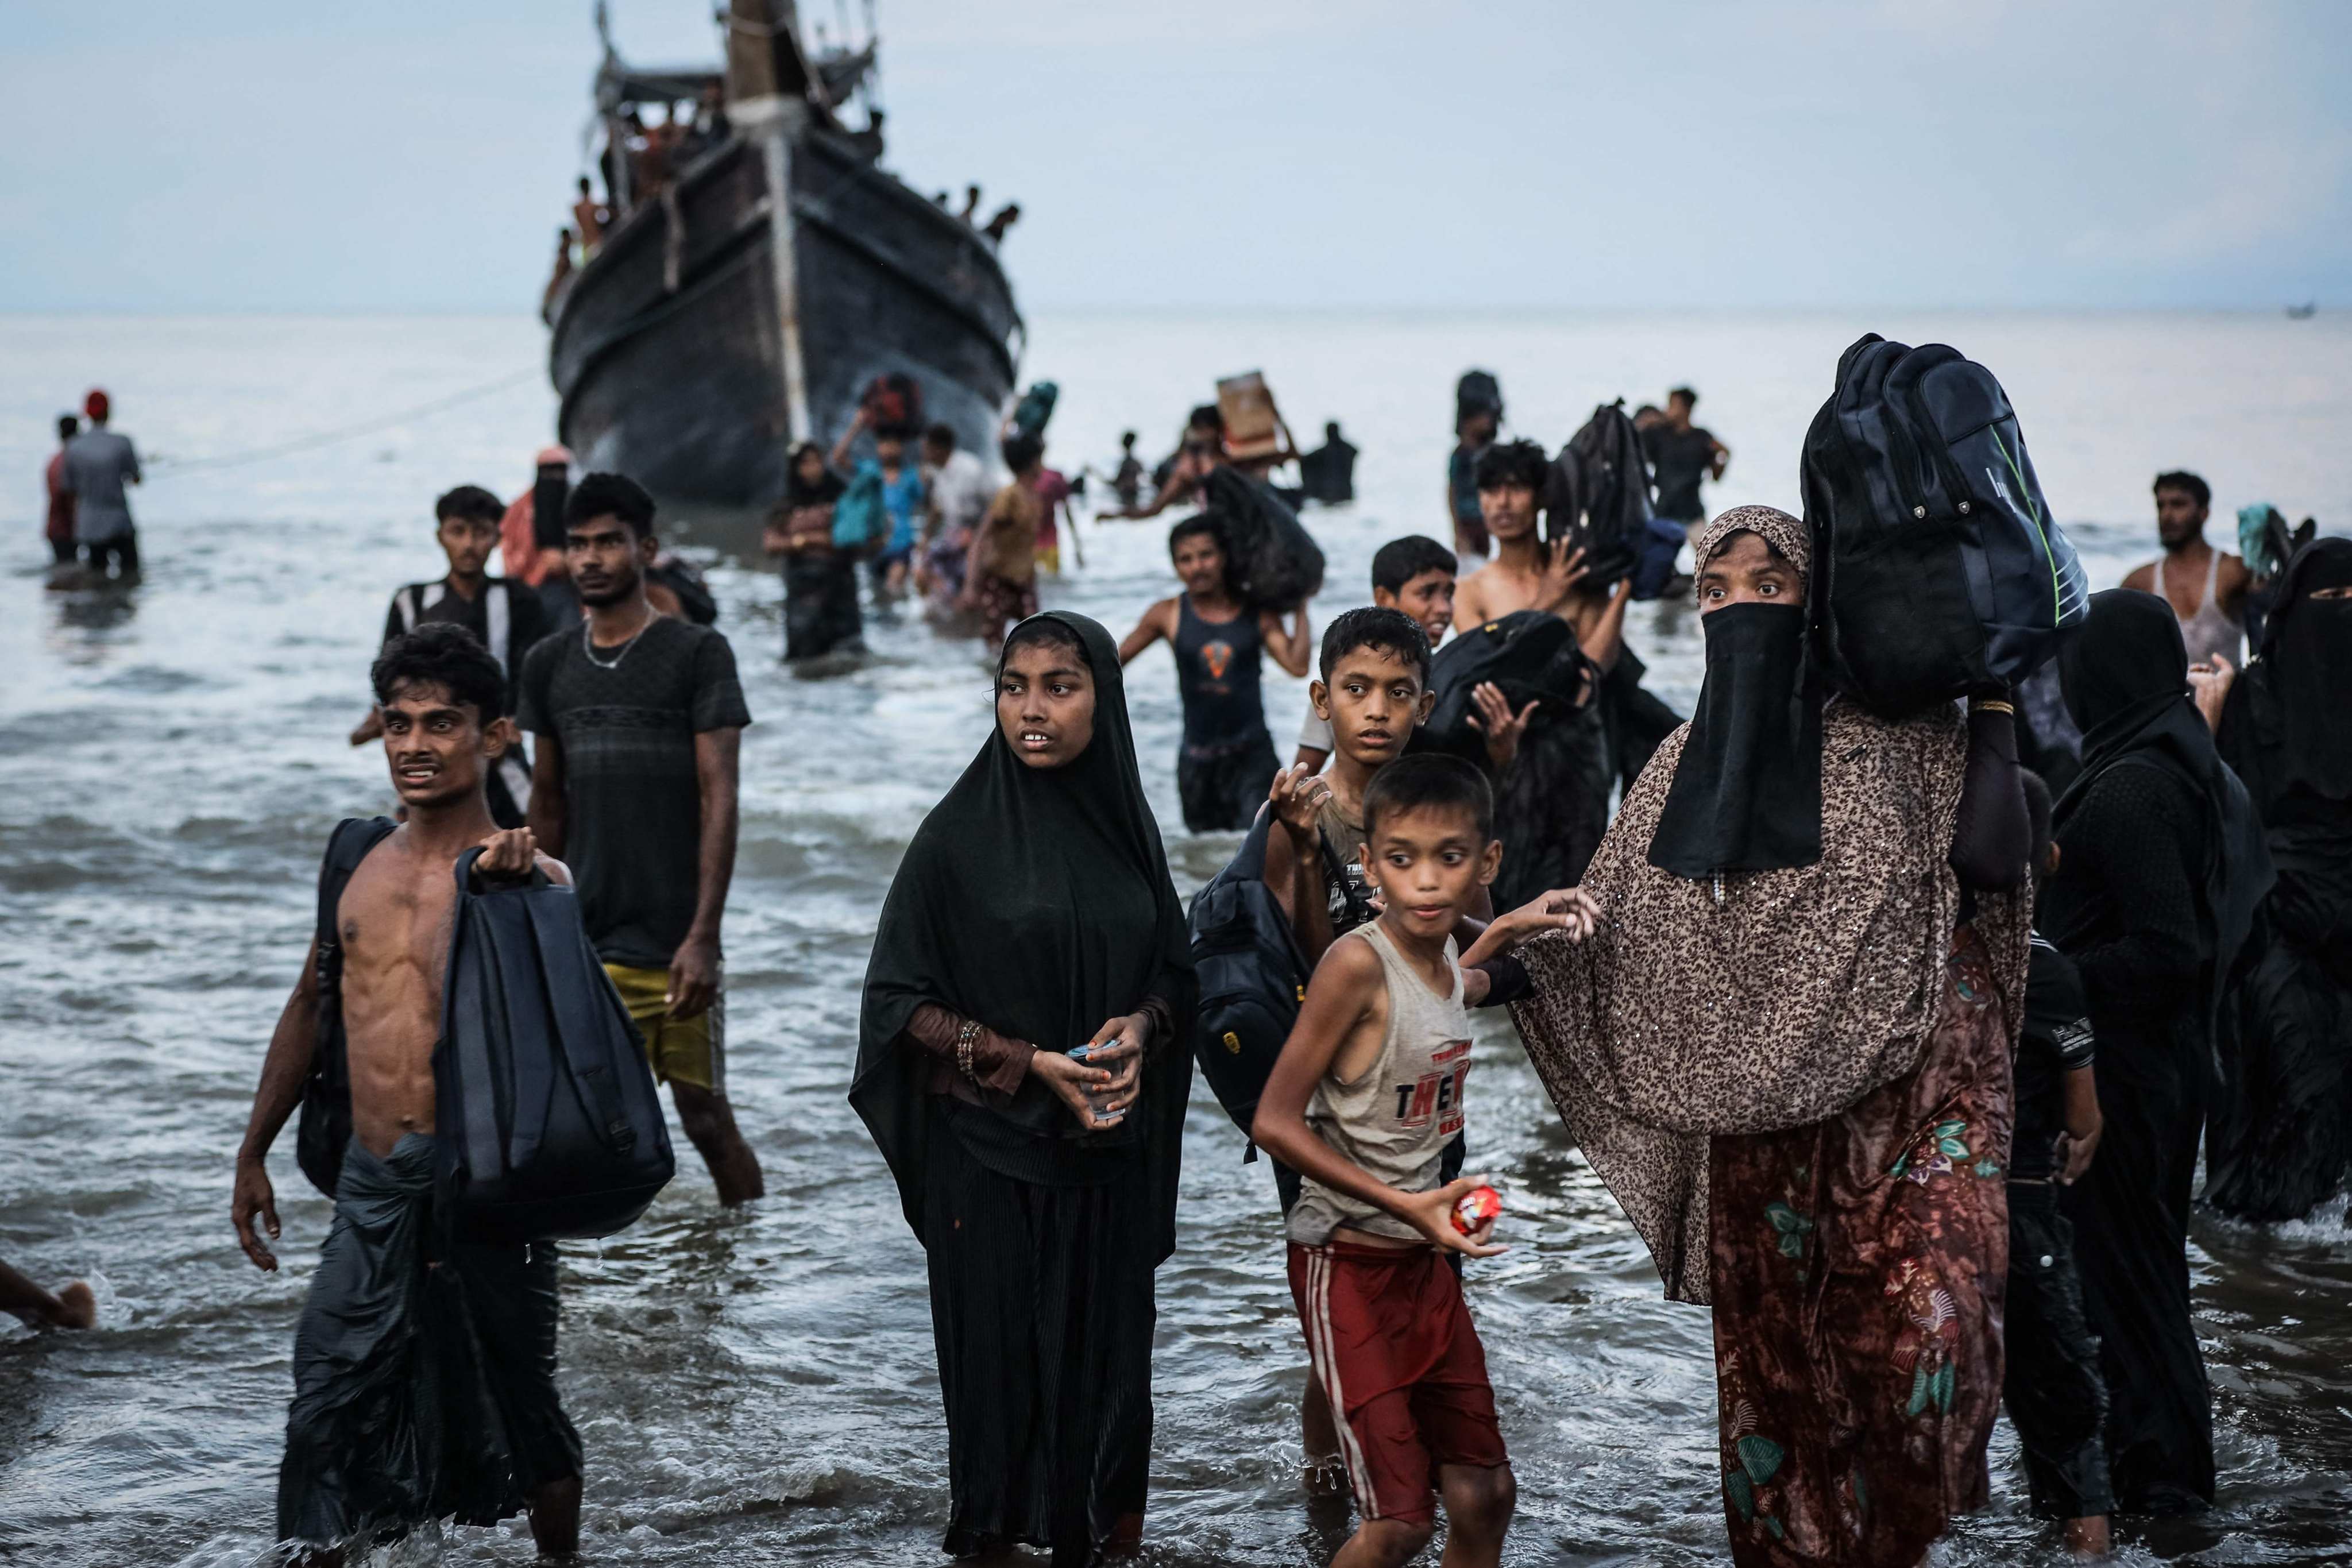 Rohingya refugees return to a boat after the local community temporarily allowed them to land for water and food in Aceh province, Indonesia, on Thursday. Photo: AFP